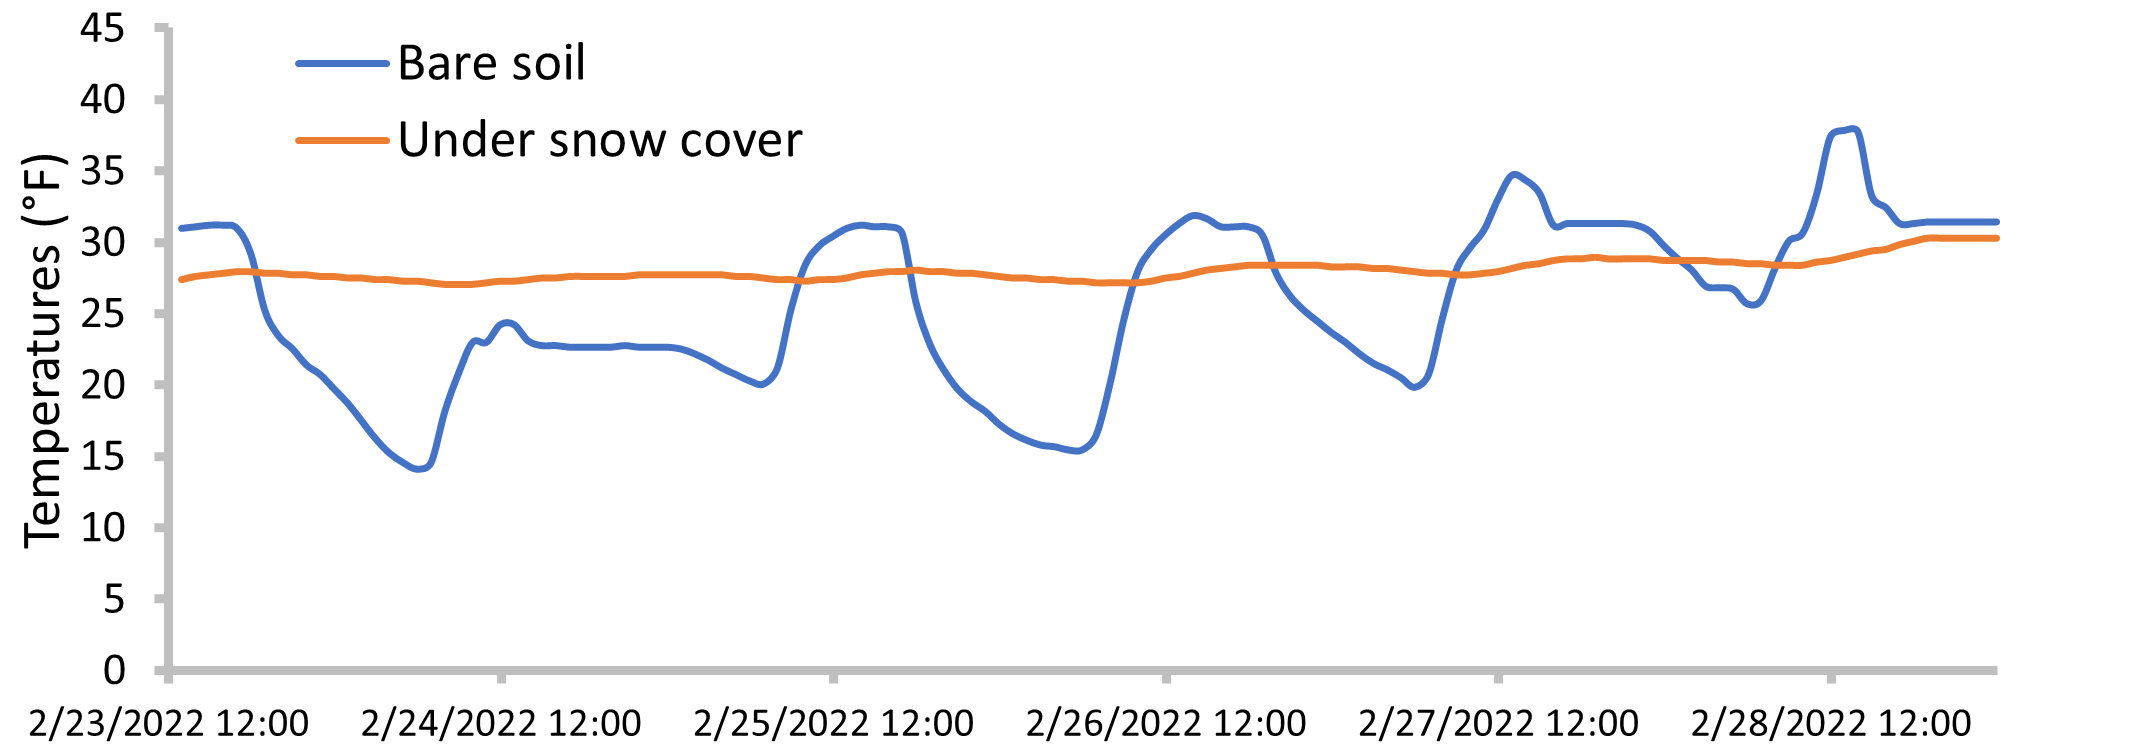 Graph of soil temperatures observed under snow cover or under bare soil in February 2022